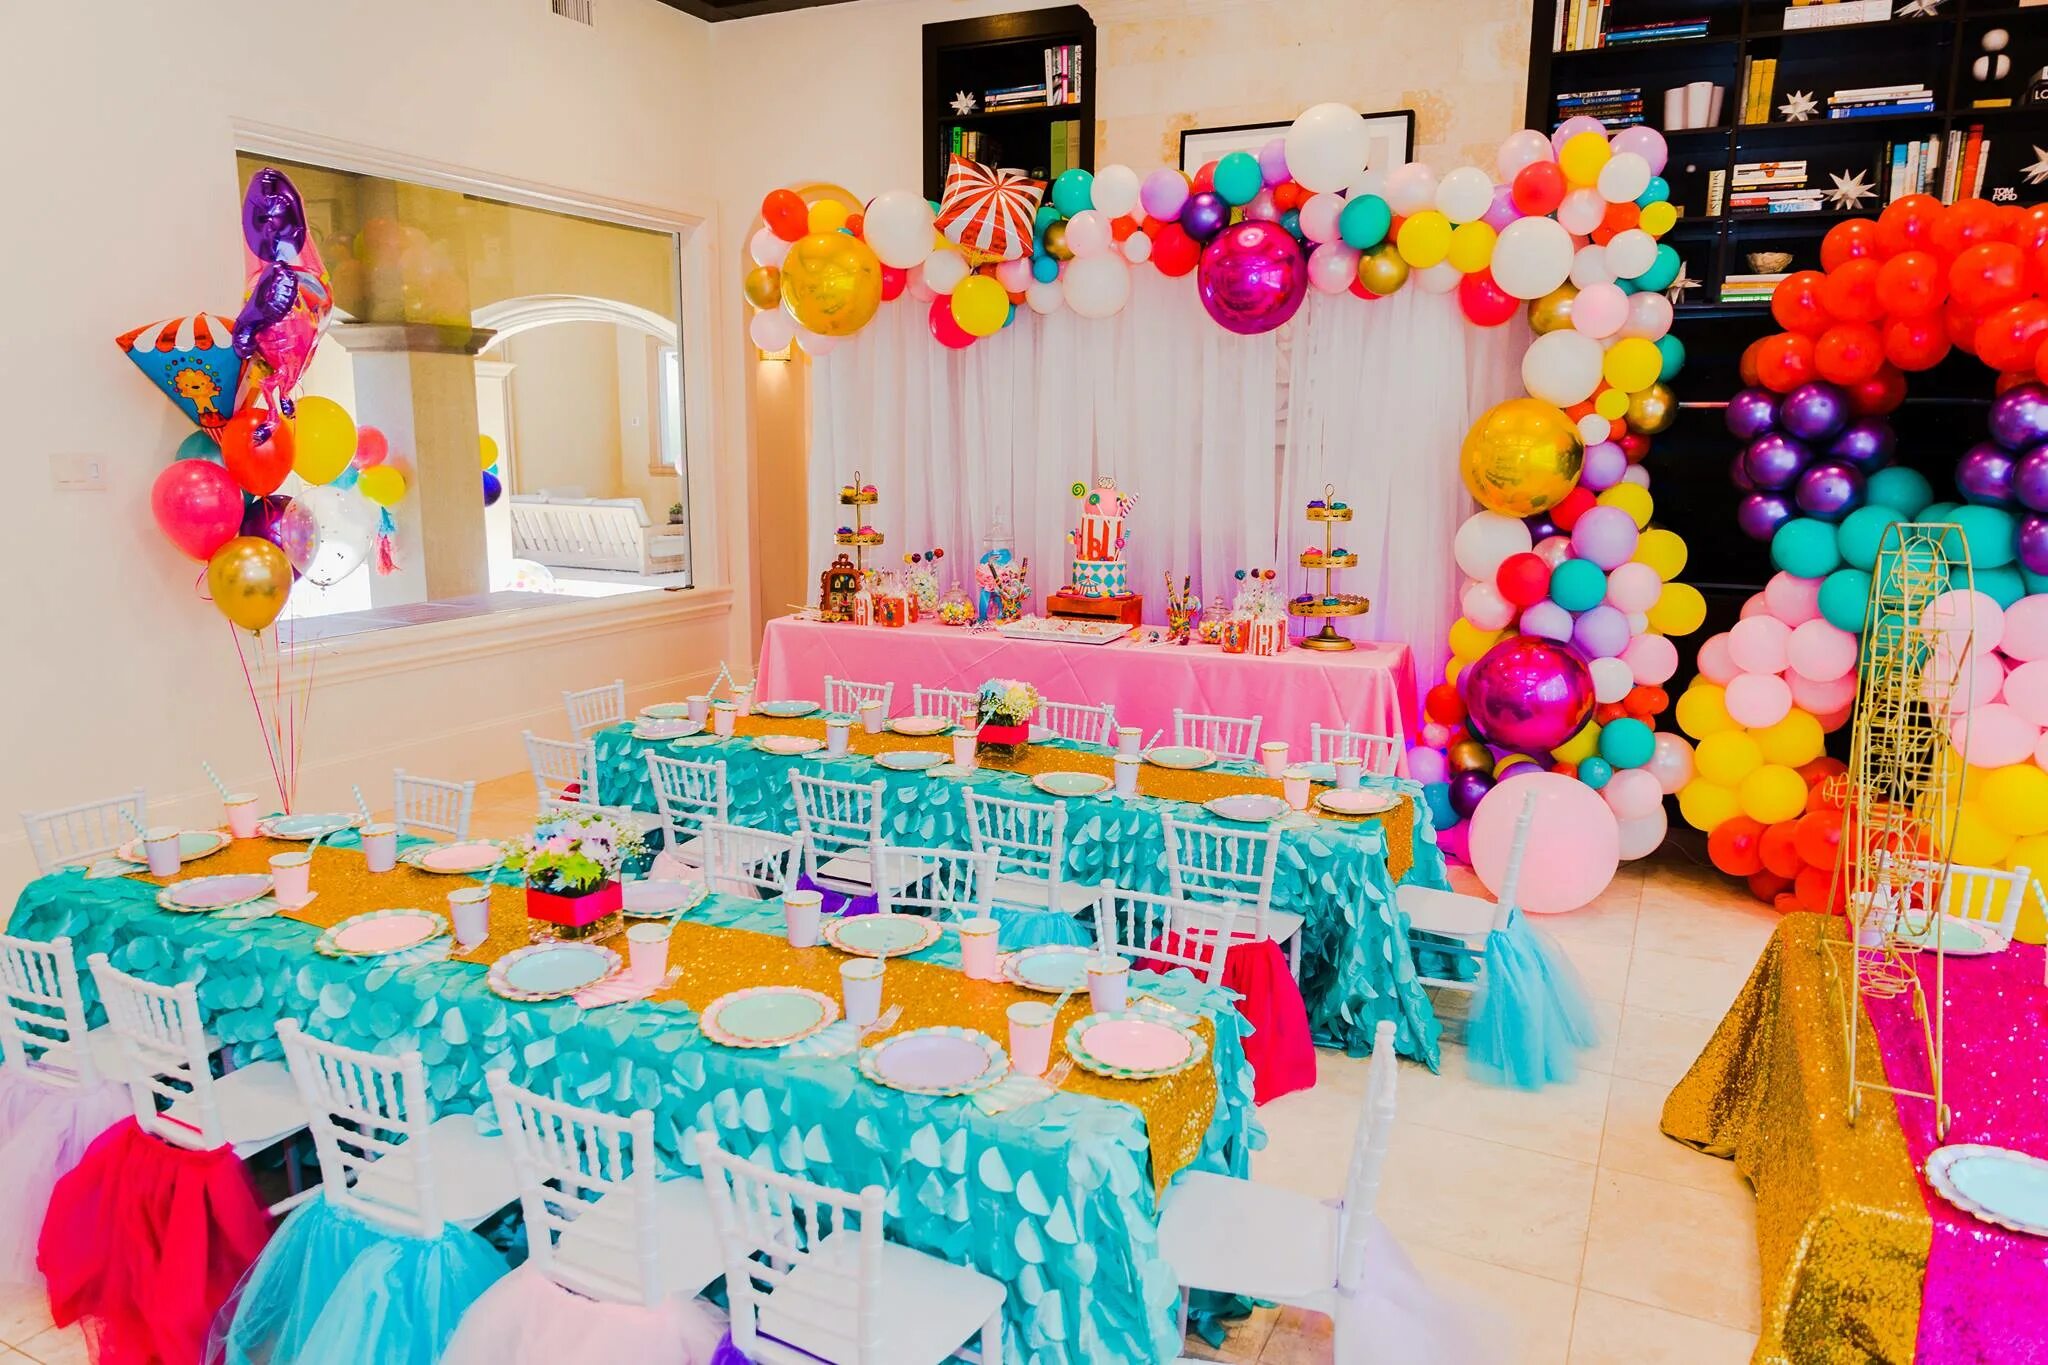 Birthday Party Planner. Planning a party